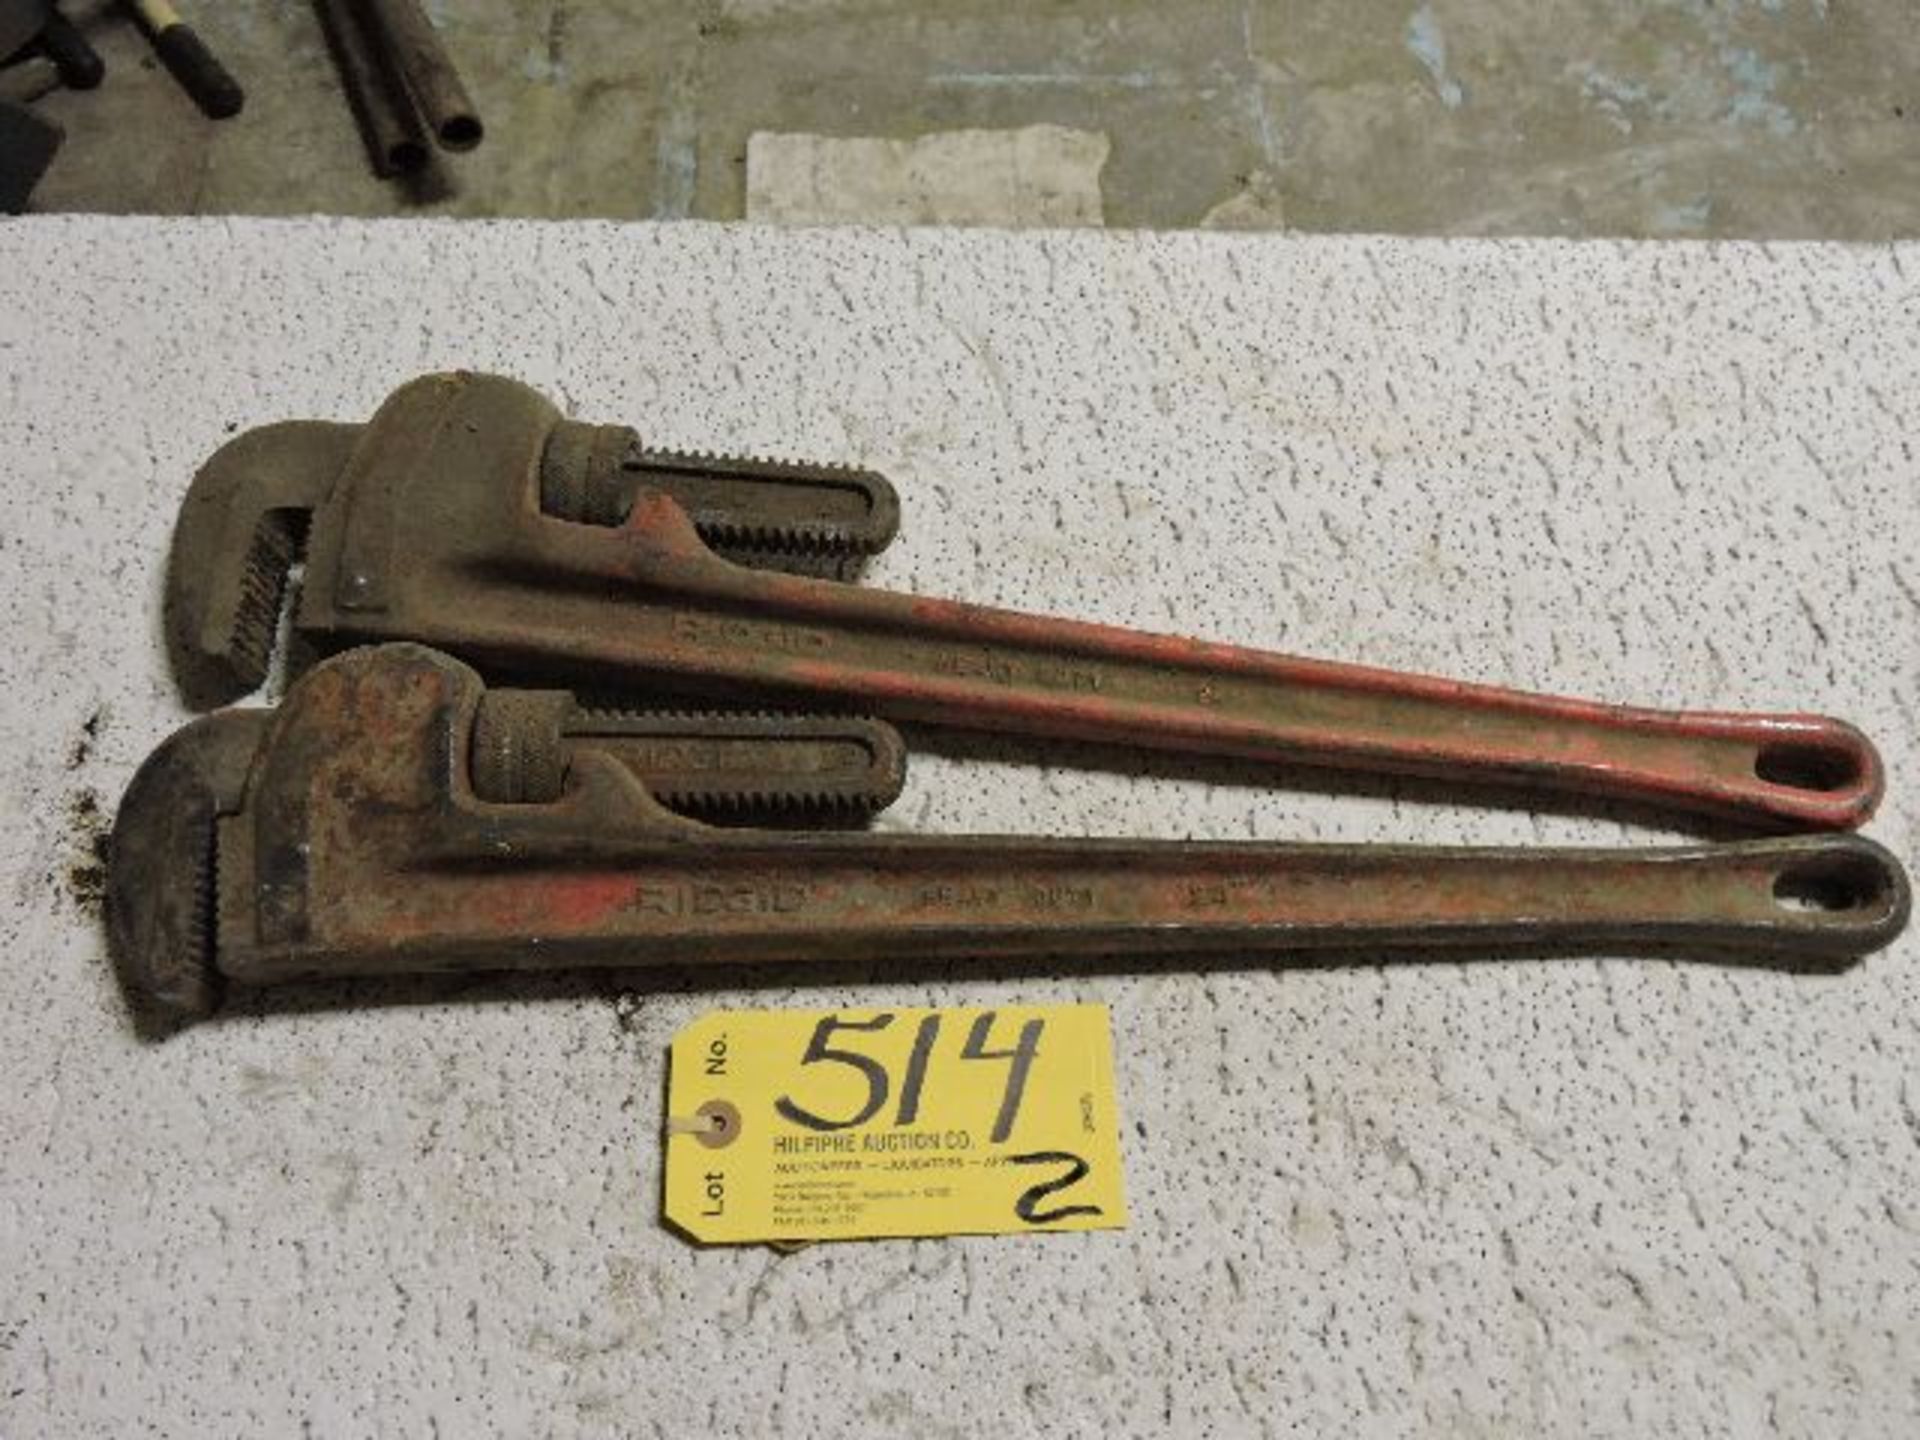 Pipe wrenches, 24".